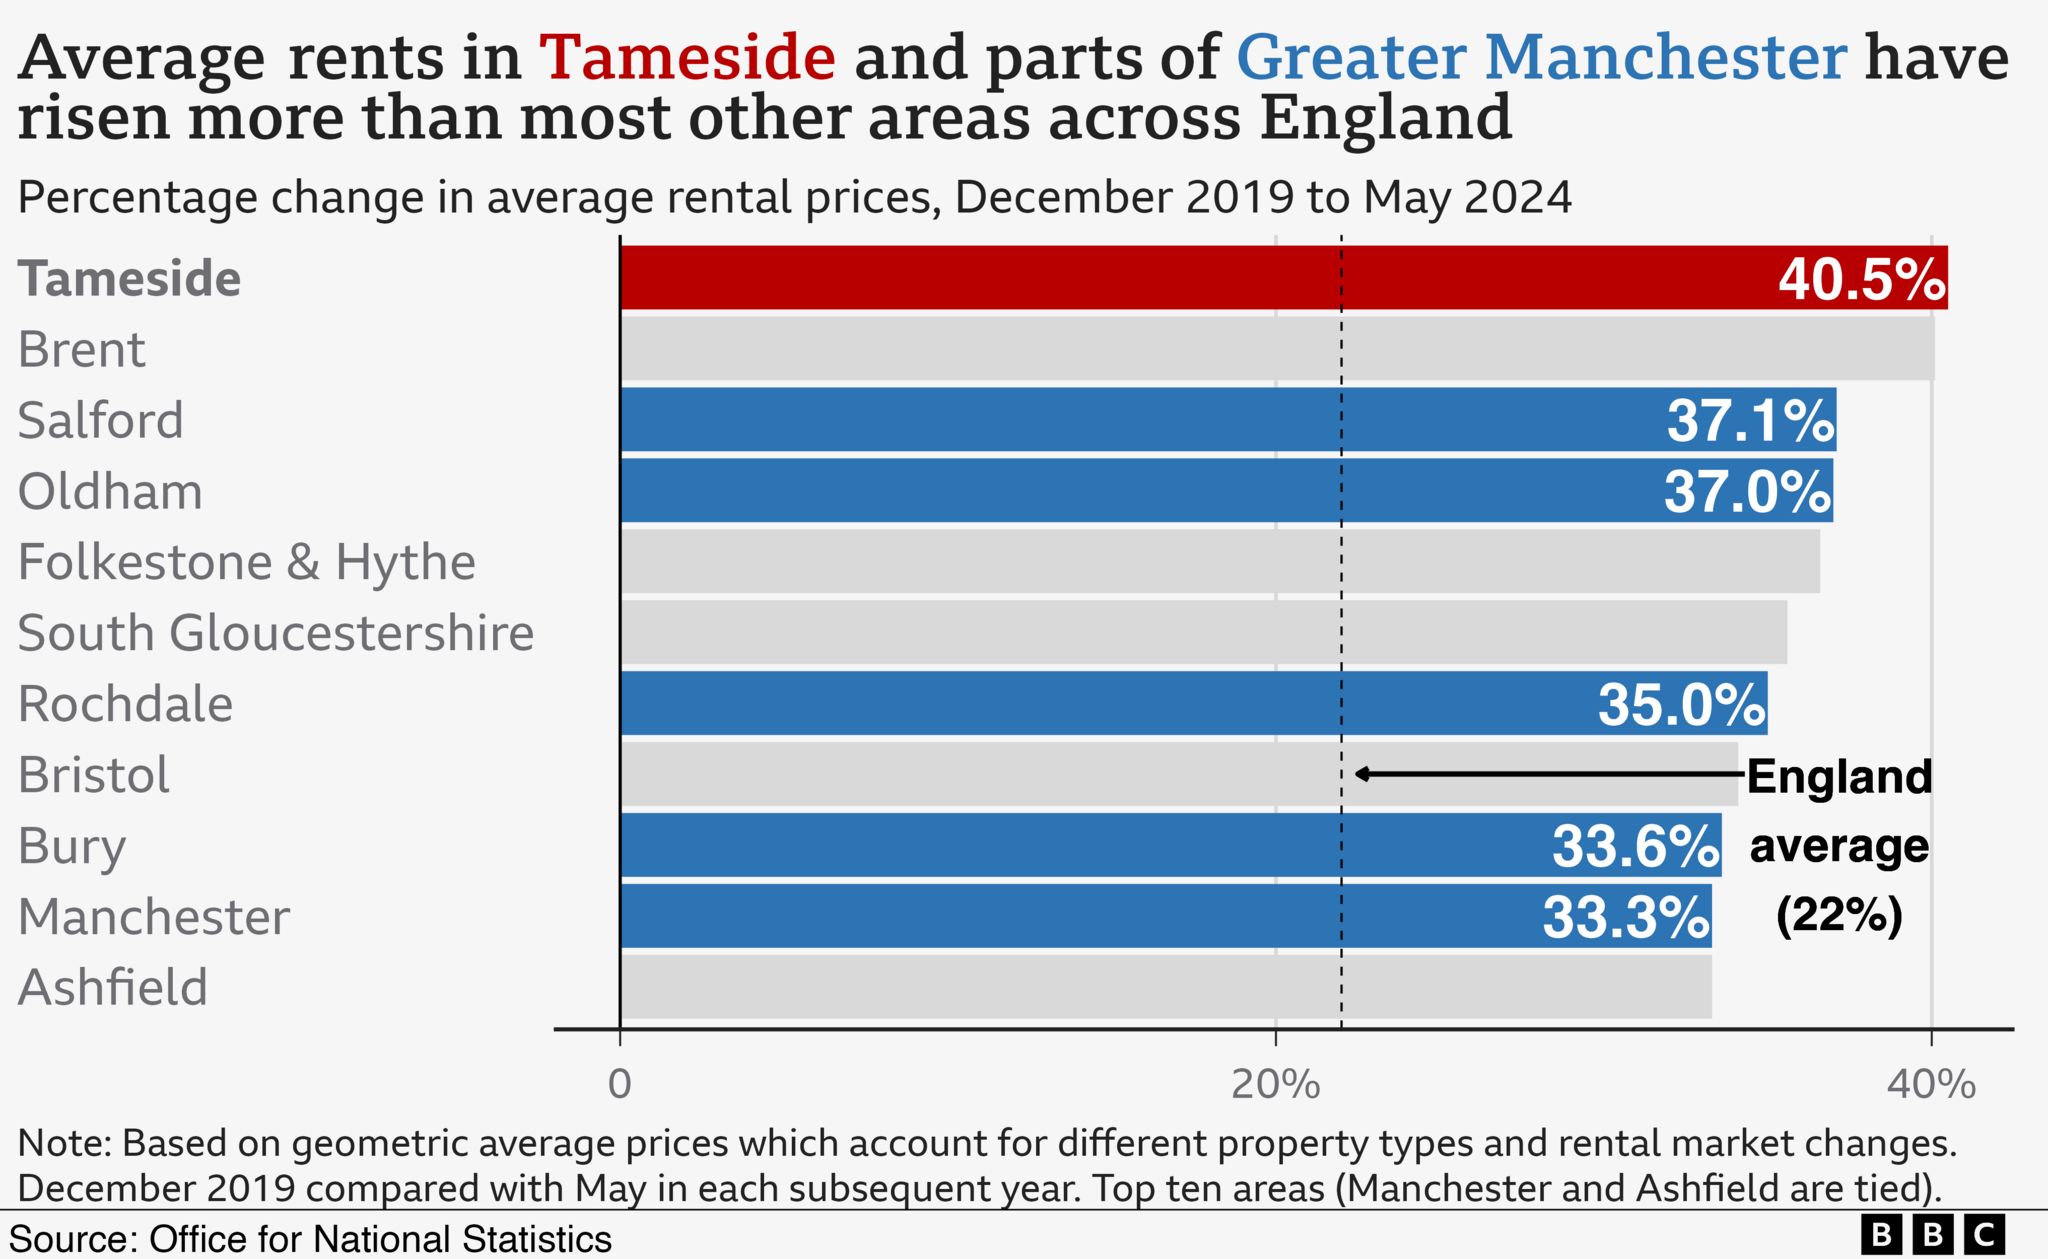 A bar chart showing the local authorities with the highest percentage increase in average rent prices since December 2019. The areas are Tameside 40.5%, Brent 40.1%, Salford 37.1%, Oldham 37%, Folkestone and Hythe 36.6%, South Gloucestershire 35.6%, Rochdale 35.0%, Bristol 34.1%, Bury 33.6%, Manchester 33.3%, Ashfield 33.3%. 